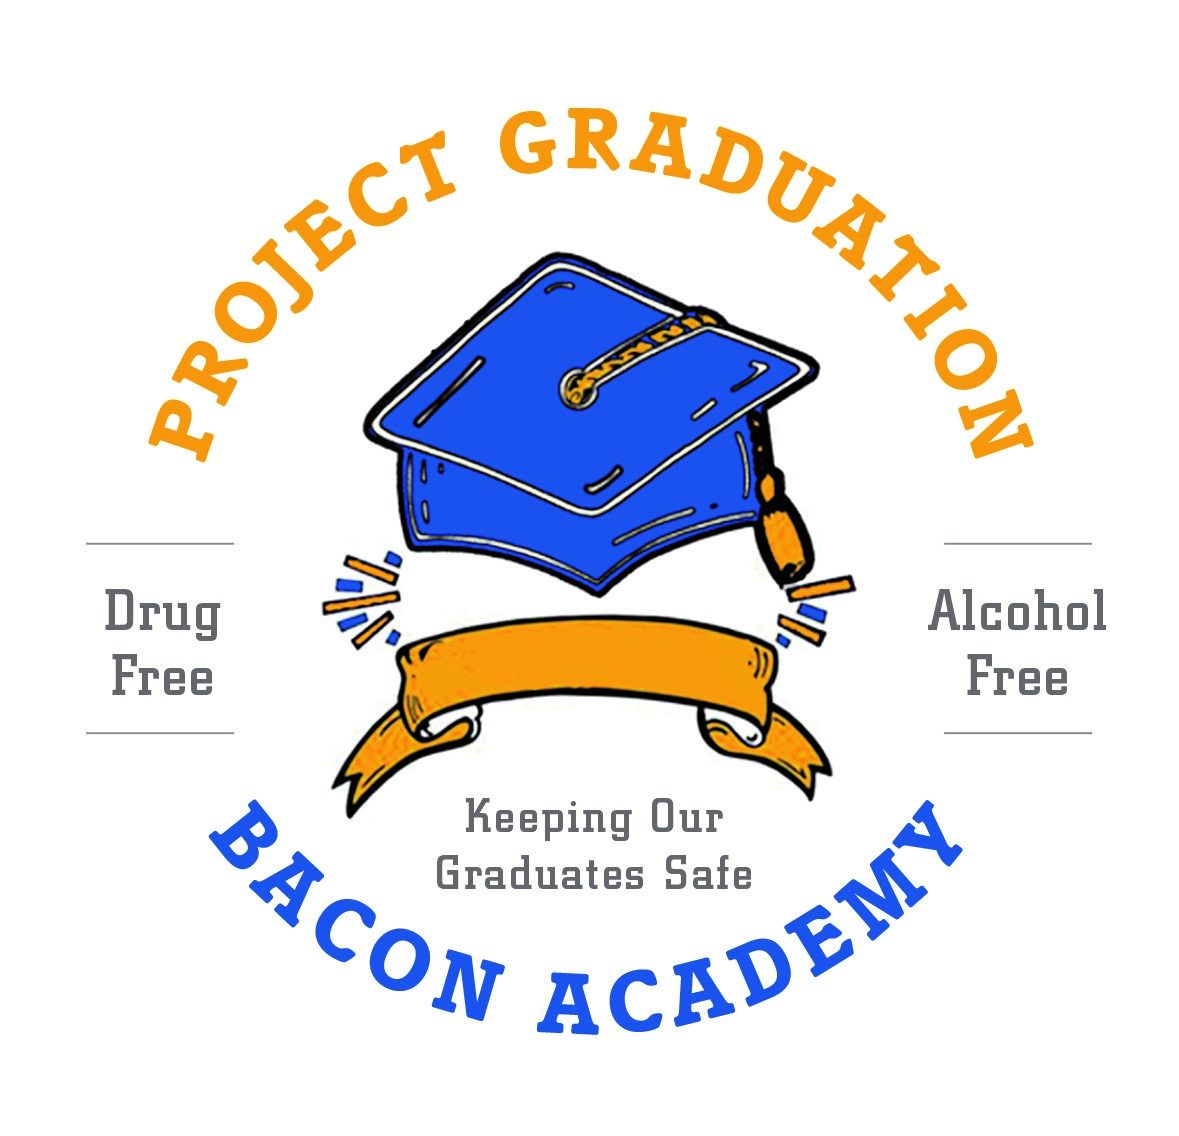 Bacon Academy Project Graduation Keeping Our Graduates Safe